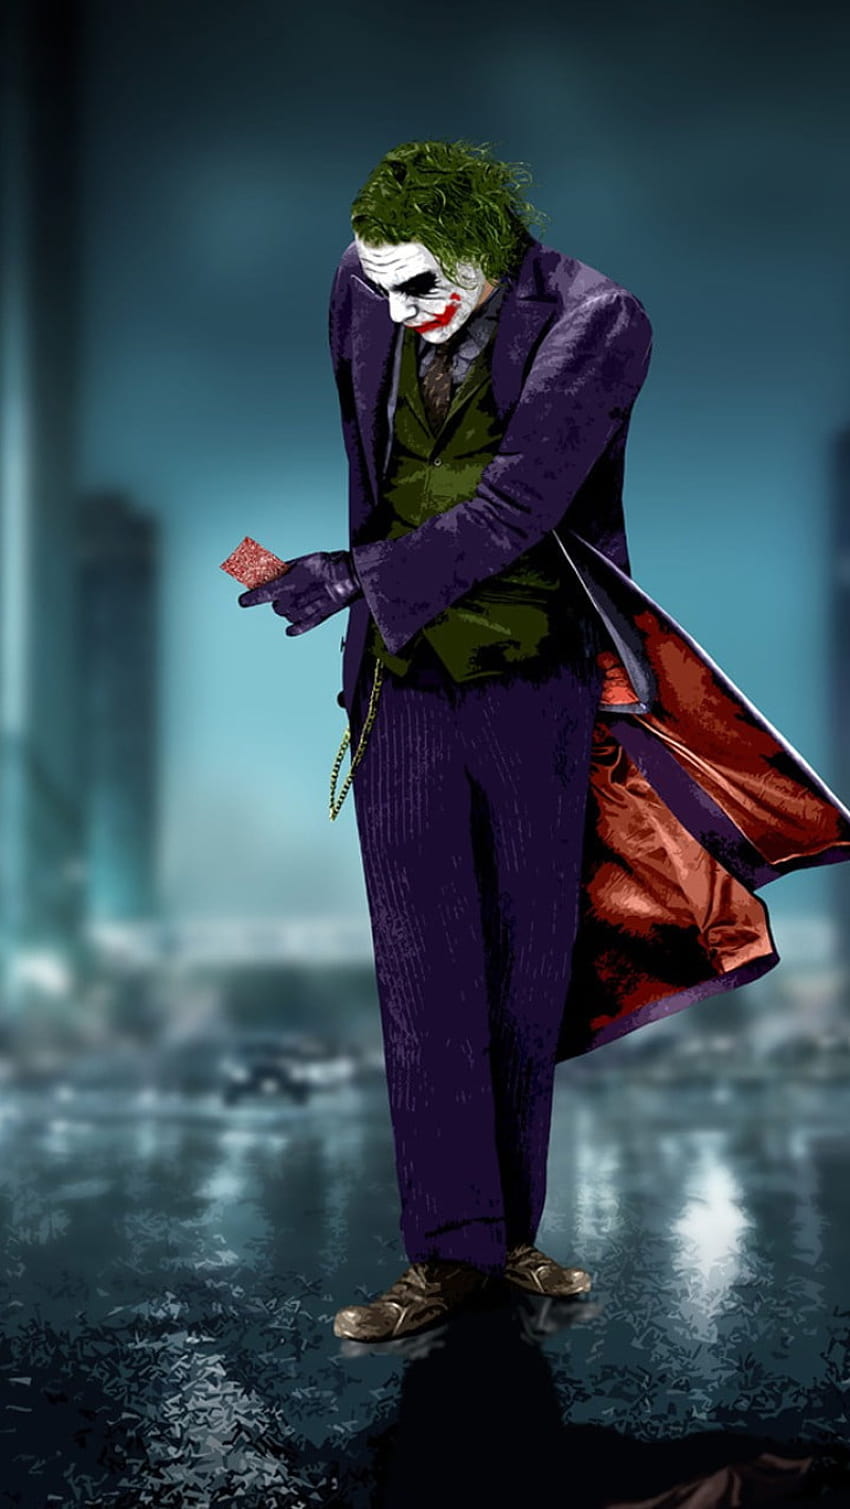 The Joker The Dark Knight movies full length one person • For You For & Mobile, boy joker HD phone wallpaper